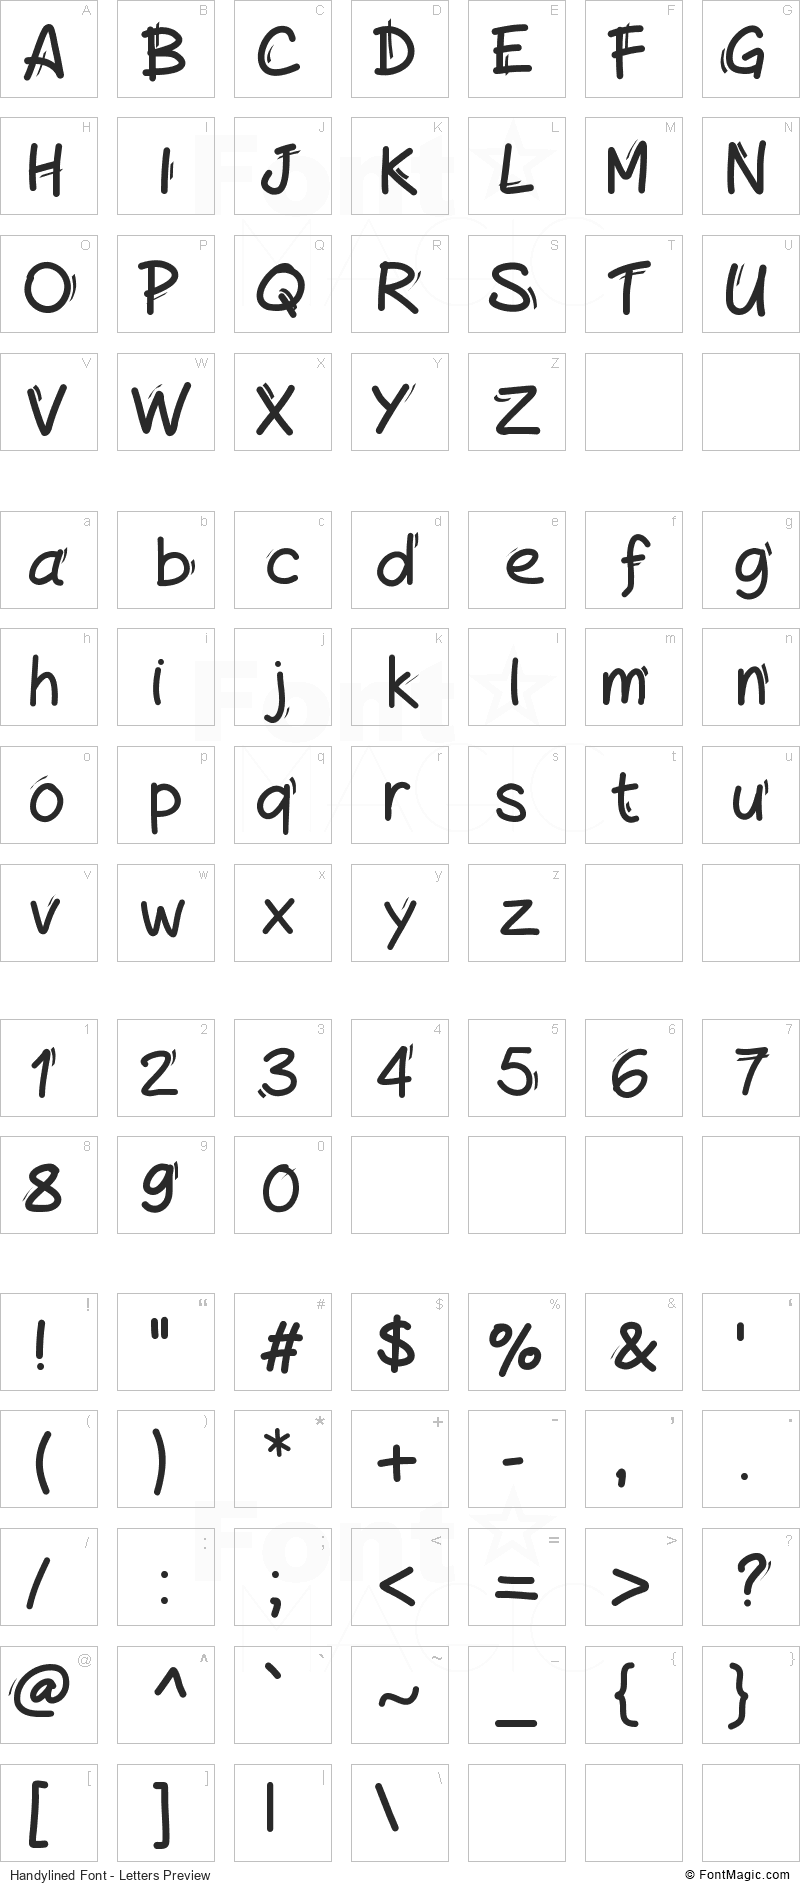 Handylined Font - All Latters Preview Chart